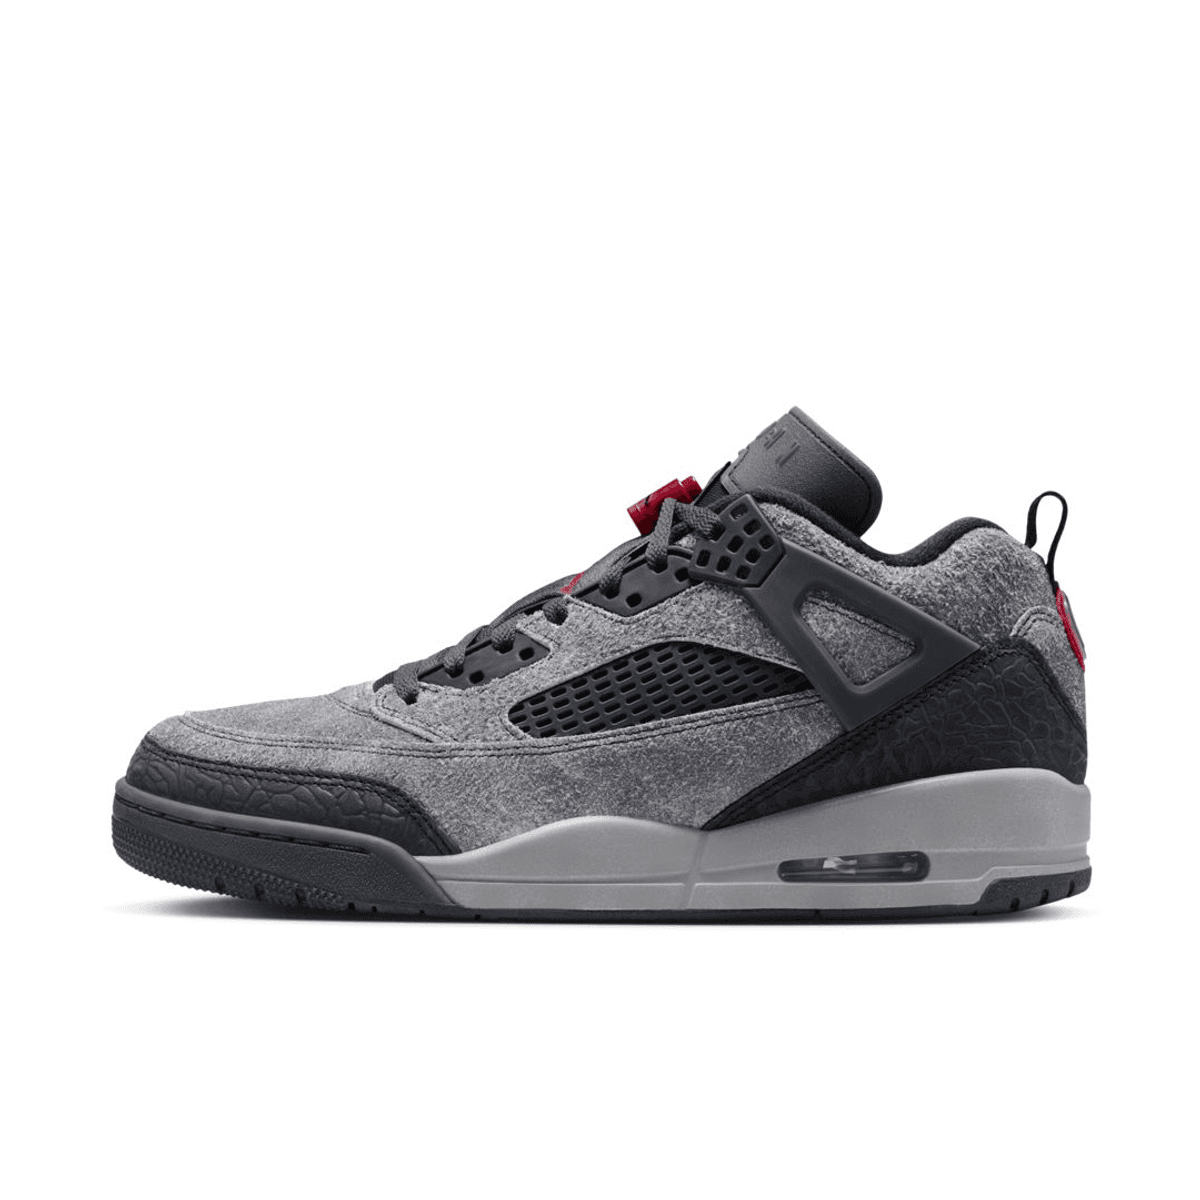 The Jordan Spizike Low "Anthracite" Arrives Fall 2024